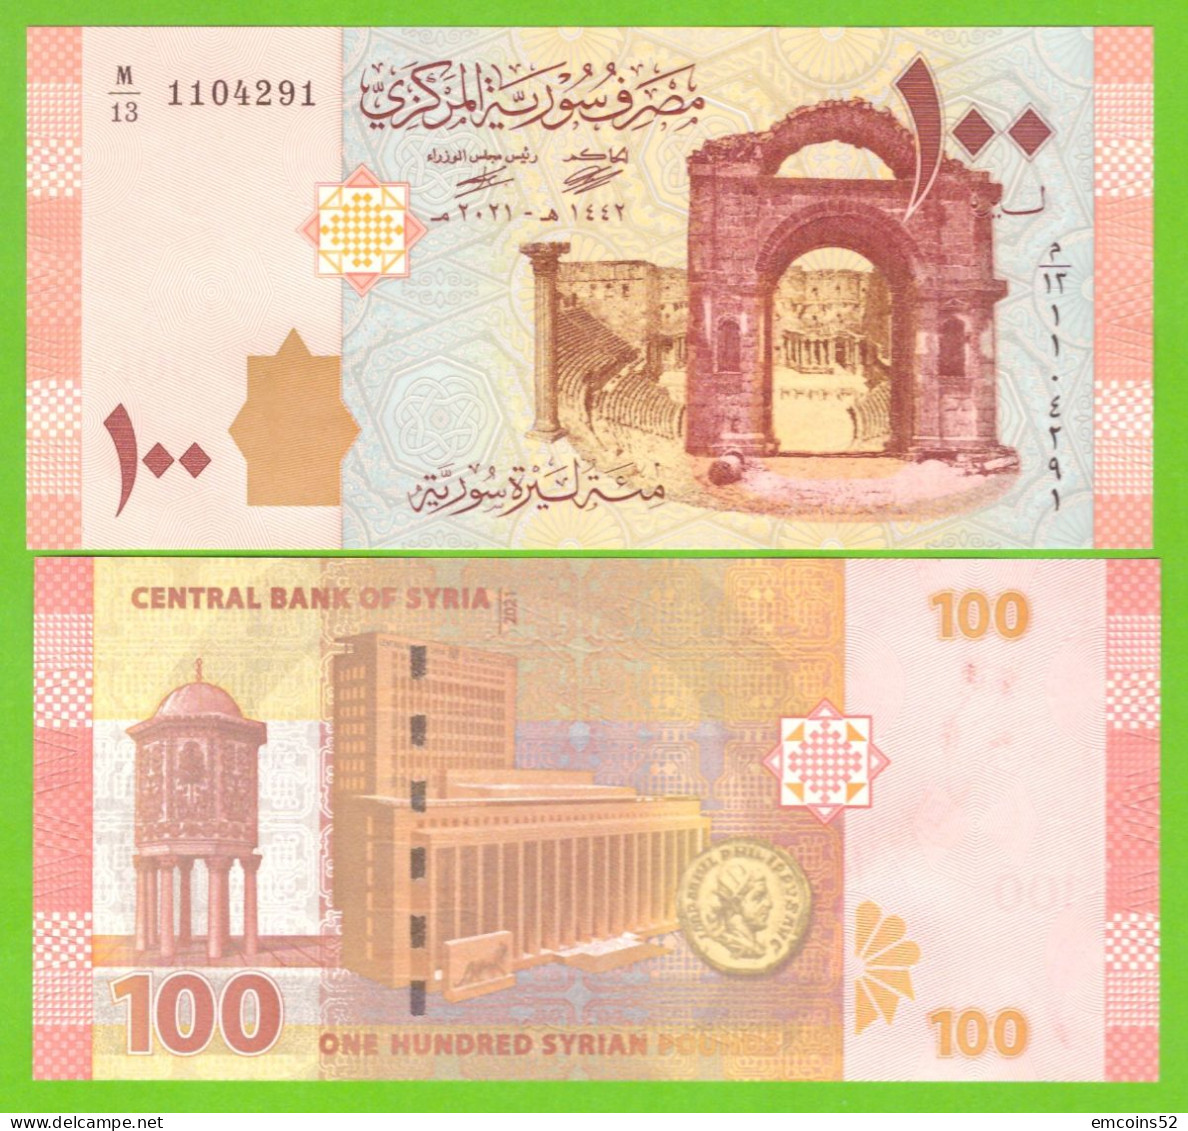 SYRIA 100 POUNDS 2021 P-113 UNC - Syrie